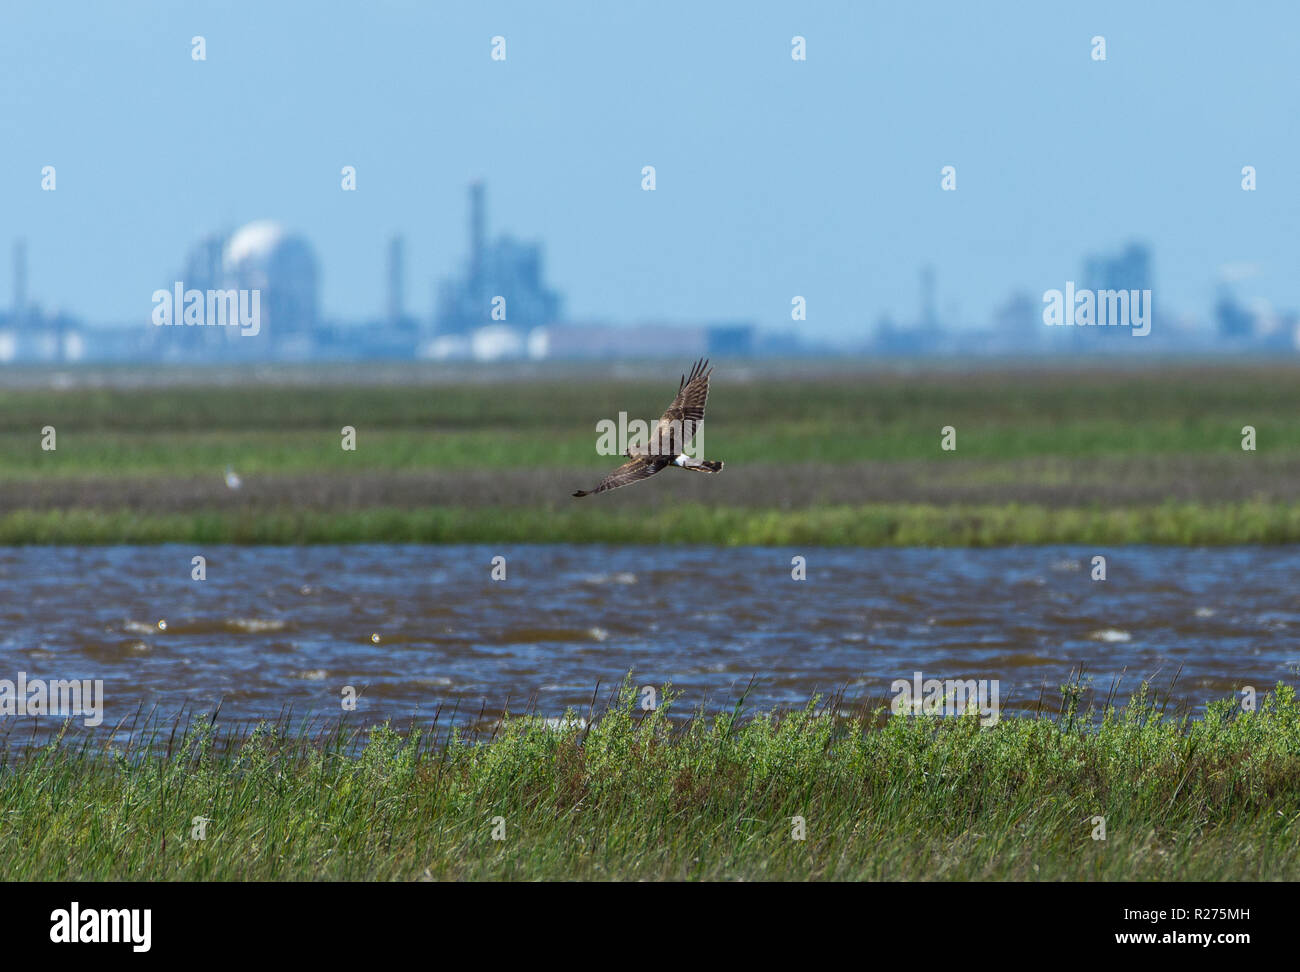 A Northern Harrier hovering over grass at Brazos National Wildlife Refuge, with an industrial complex in the background. Galveston, Texas, USA. Stock Photo